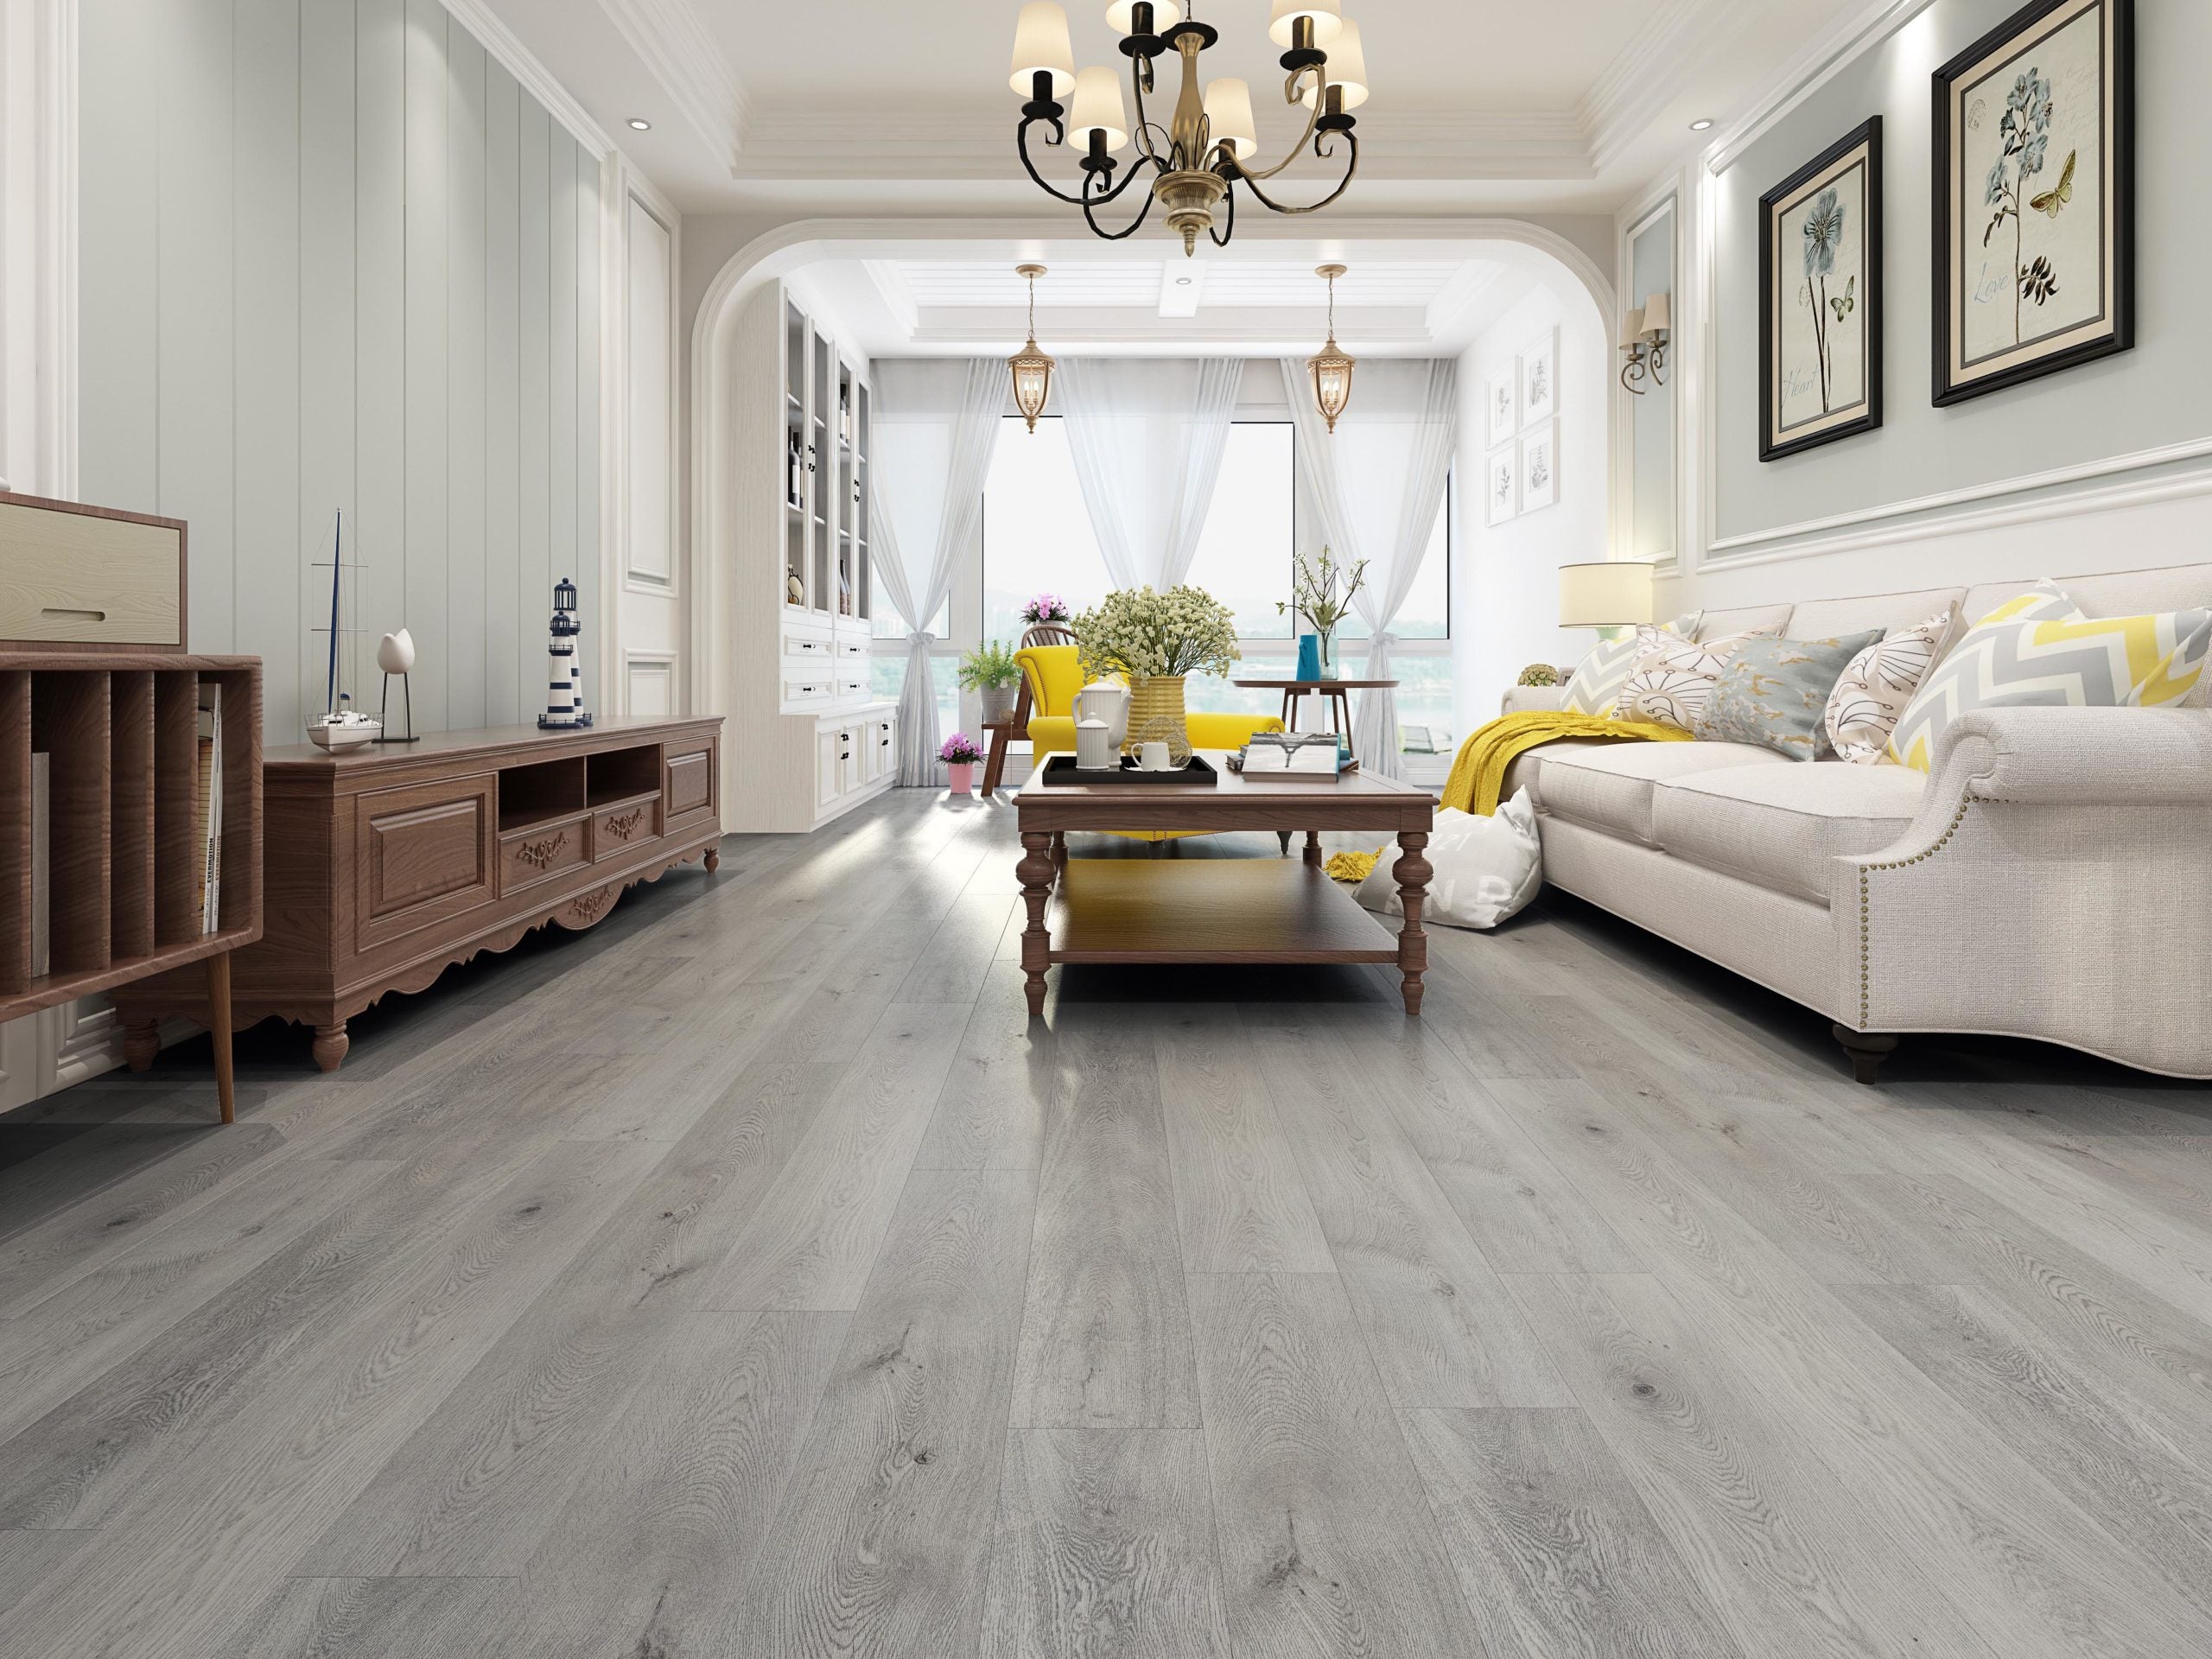 rooms with grey wood flooring